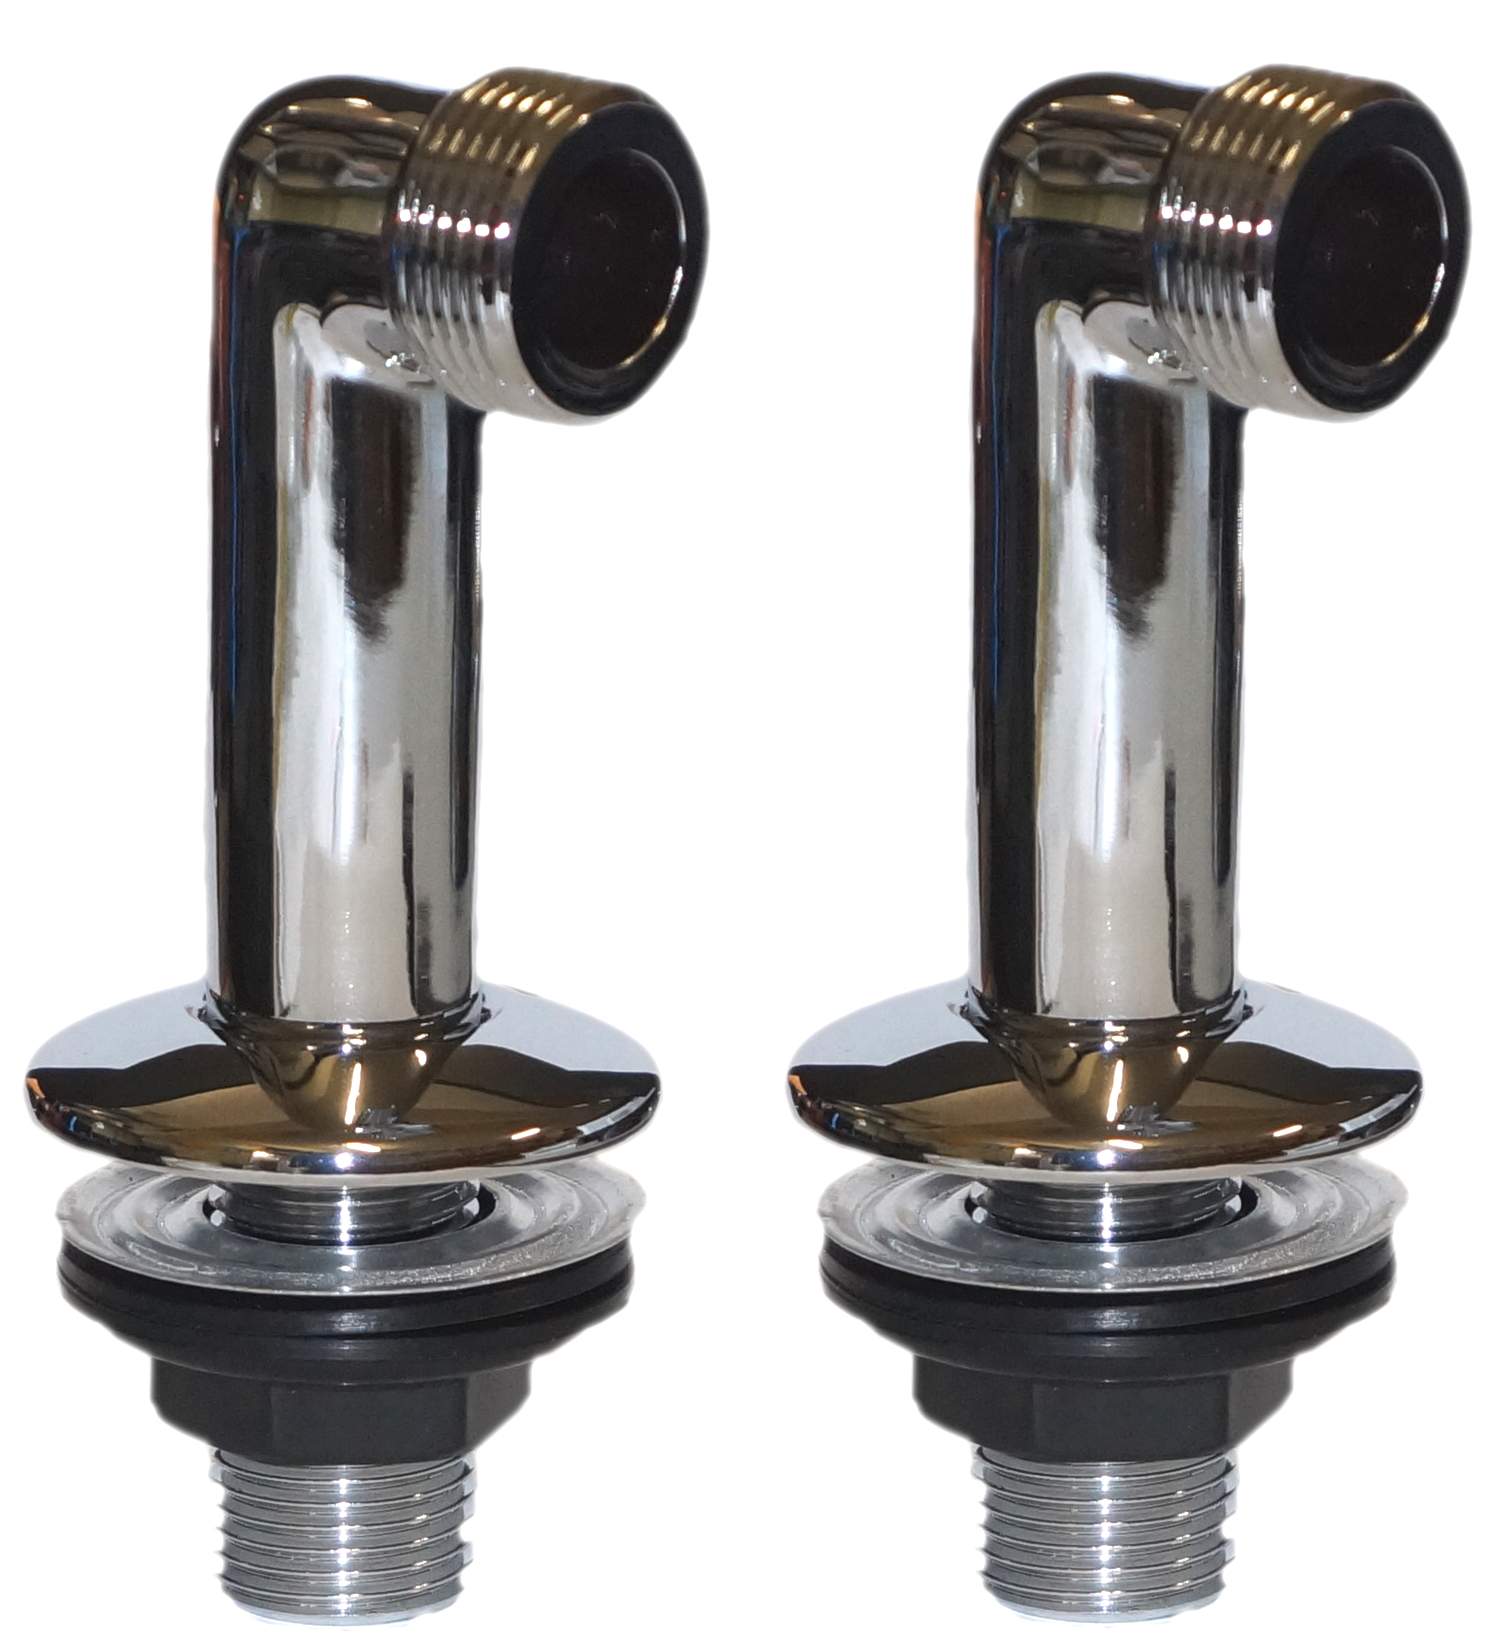 Pair of 15 x 21 / 20 x 27 double male groove fittings